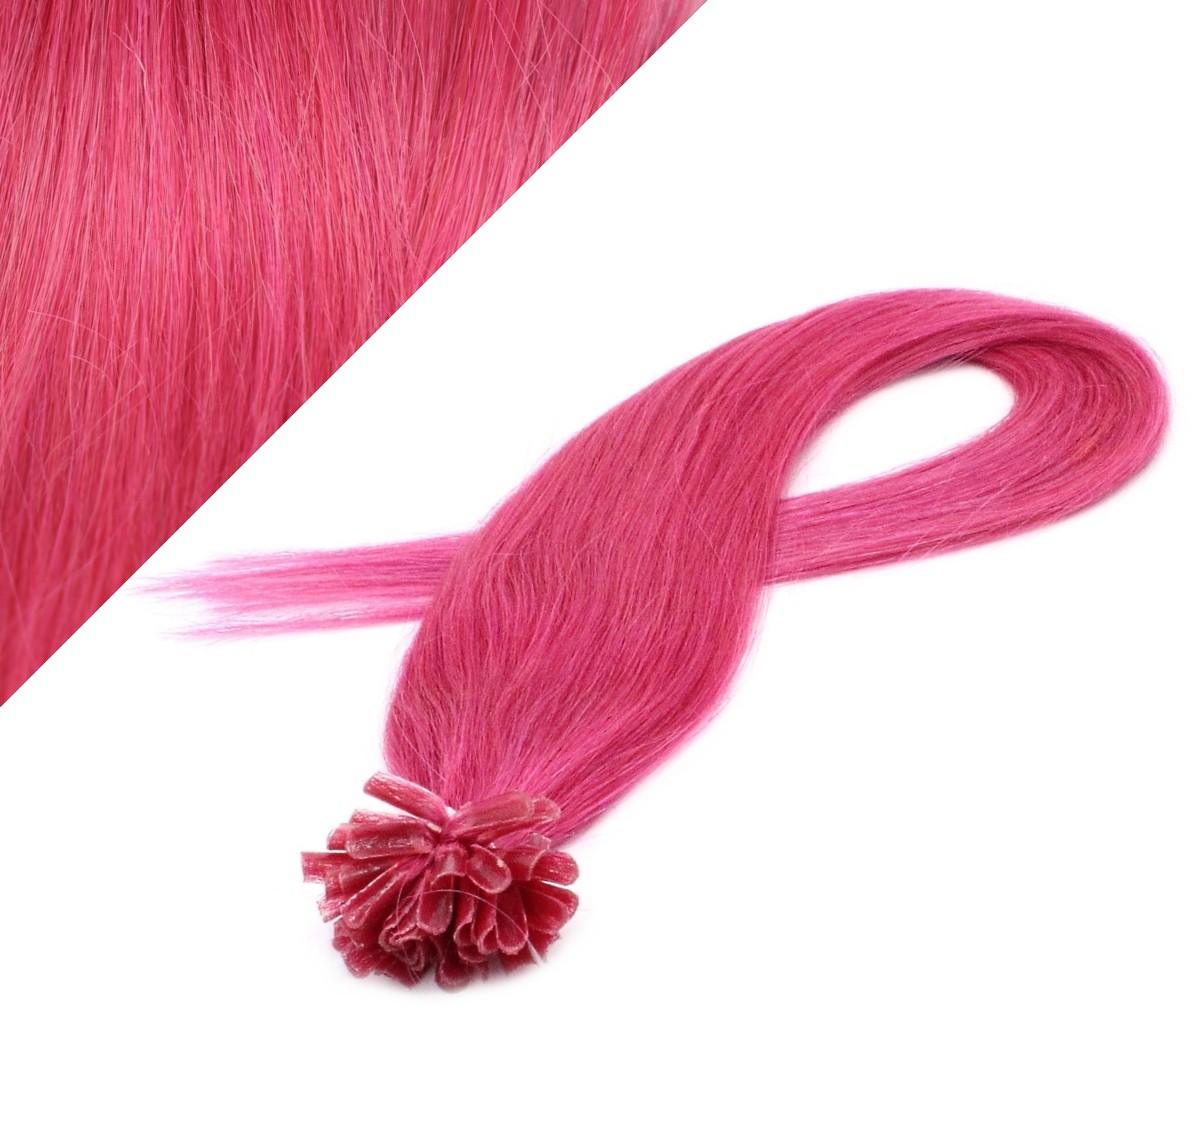 hair extensions pink